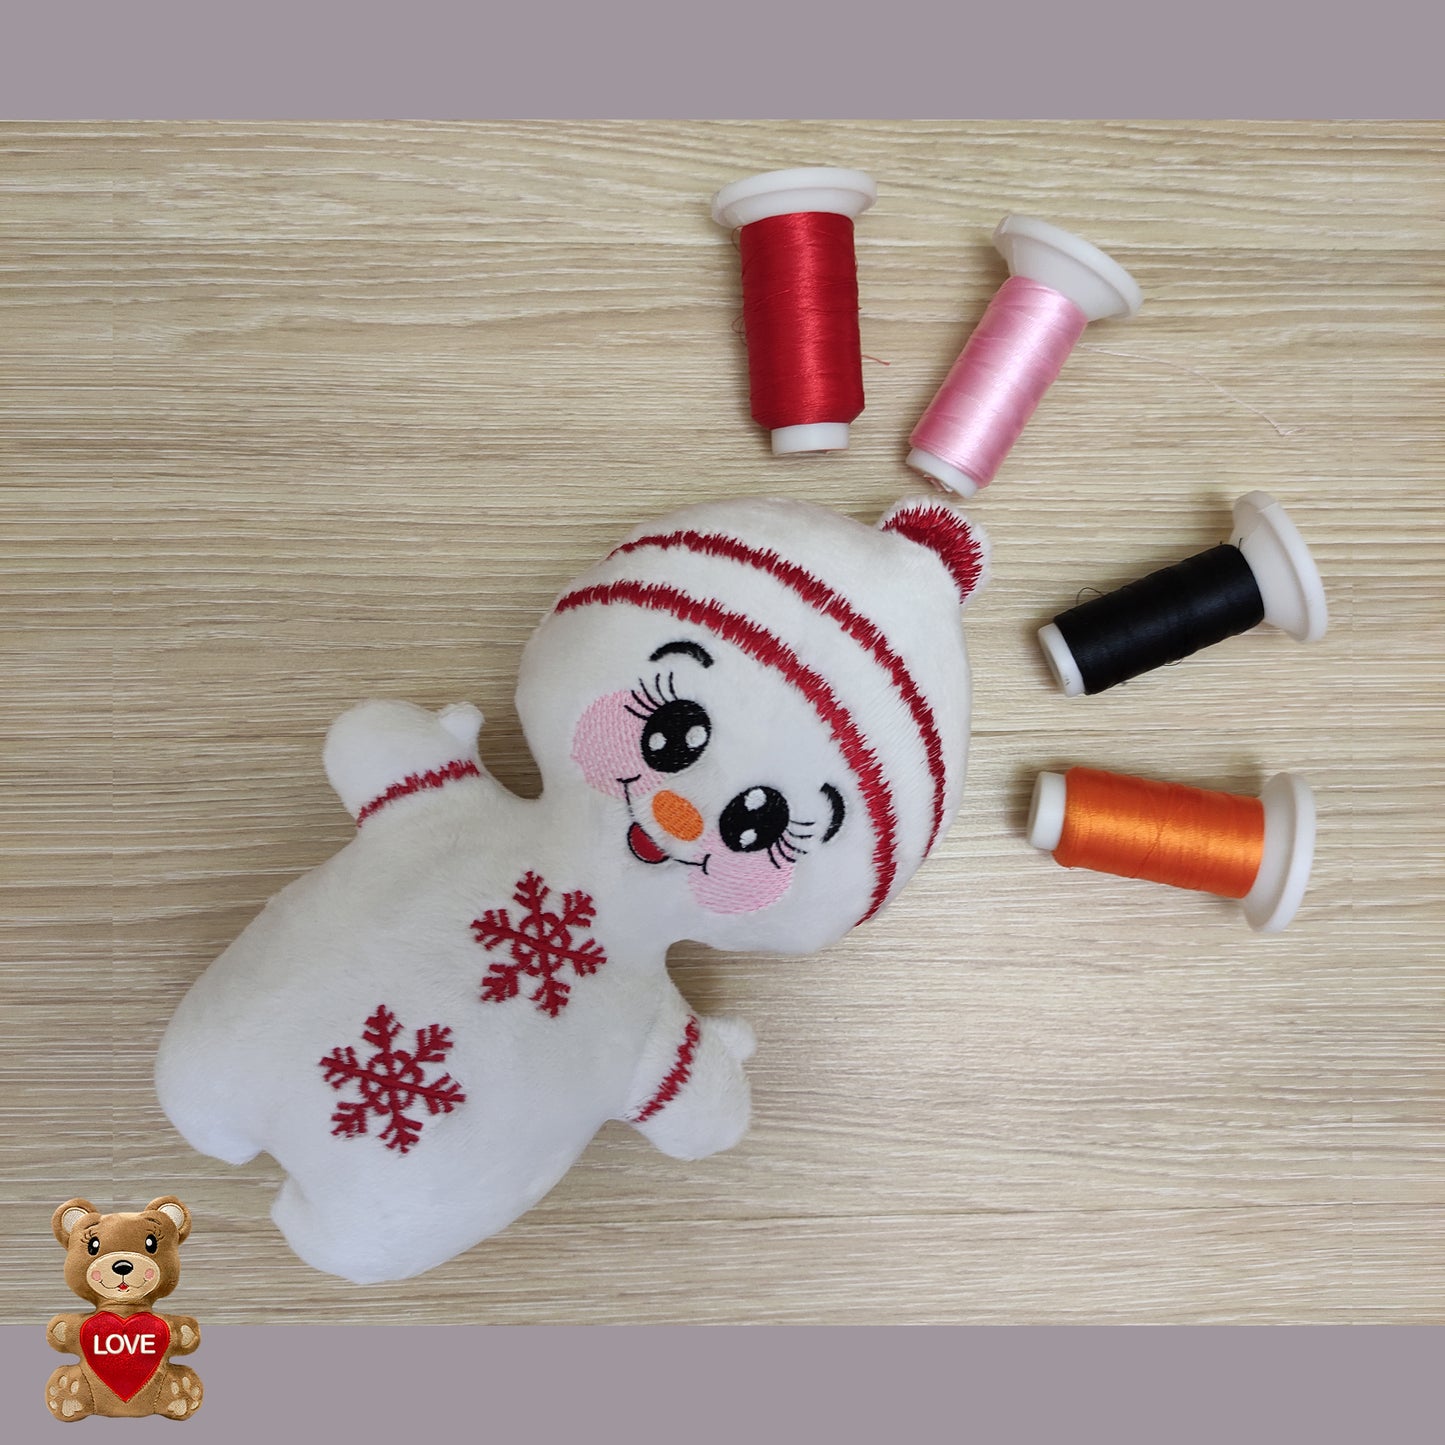 Personalised embroidery Plush Soft Toy Christmas Snowman ,Super cute personalised soft plush toy, Personalised Gift, Unique Personalized Birthday Gifts , Custom Gifts For Children